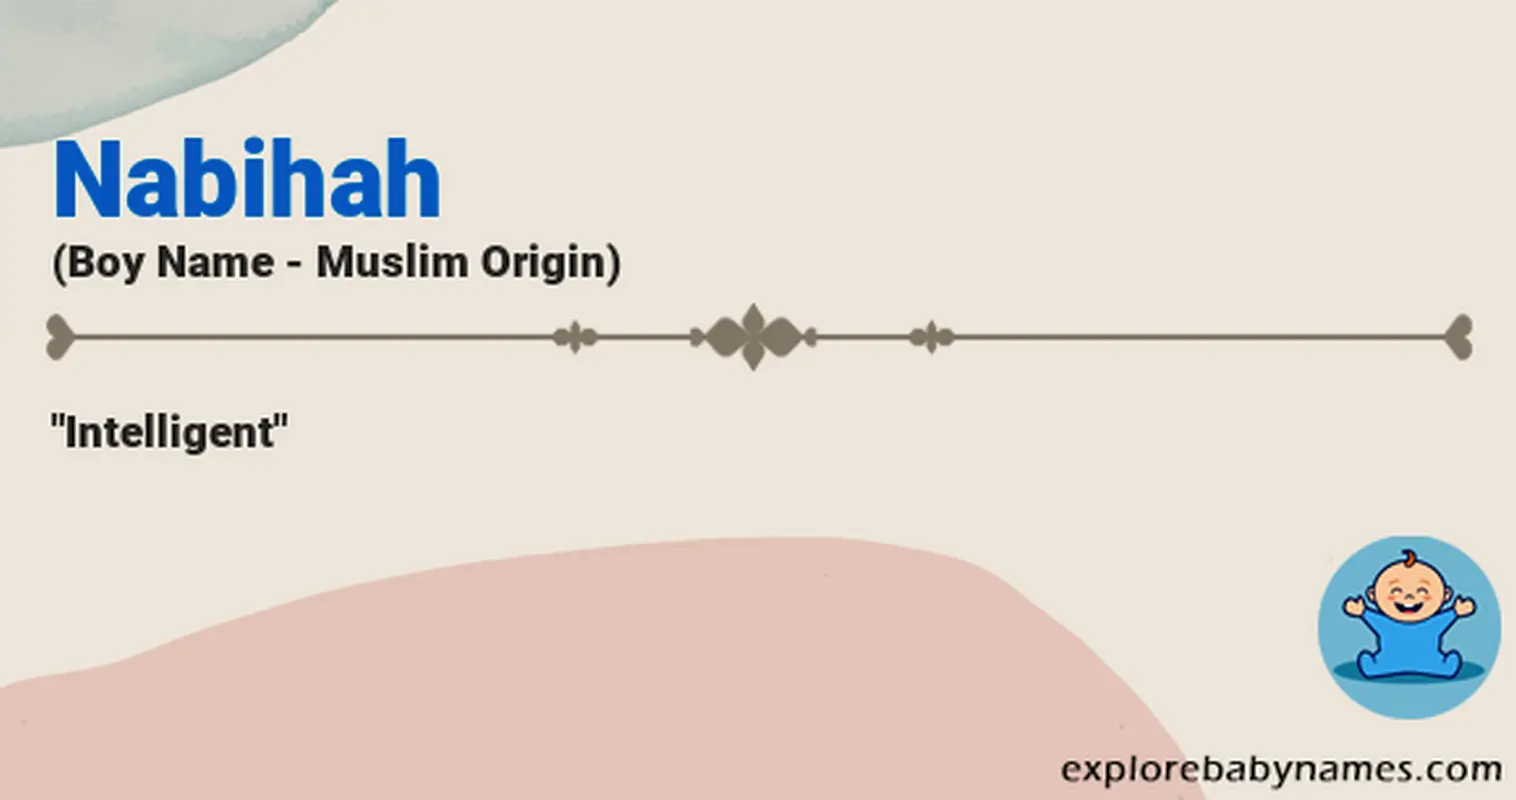 Meaning of Nabihah